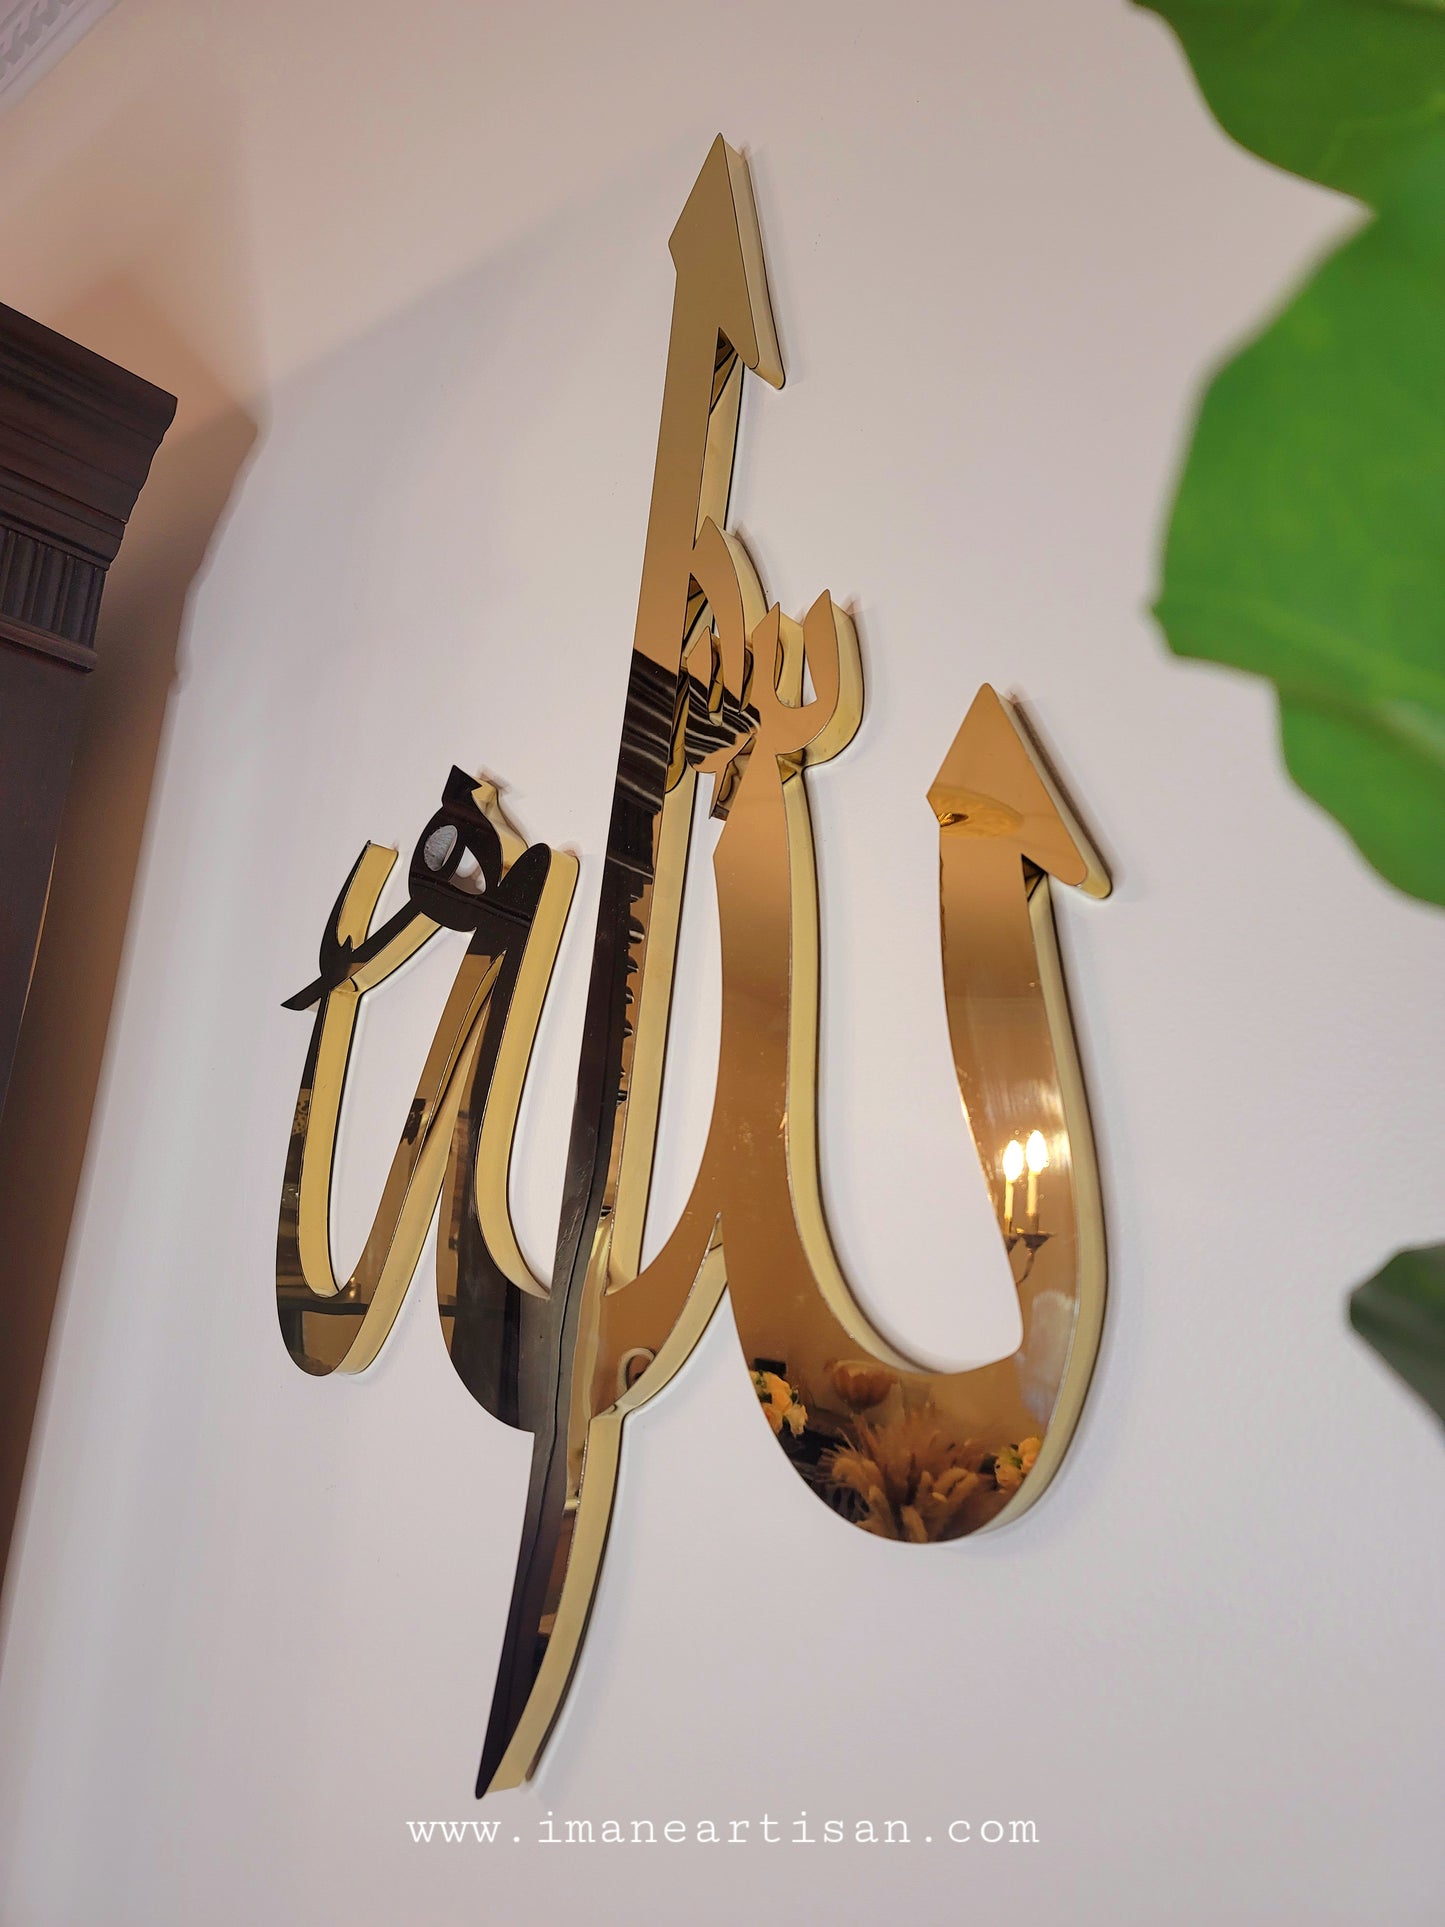 Allah and Mohammad (PBUH) Stainless steel 3D Wall Decor Set